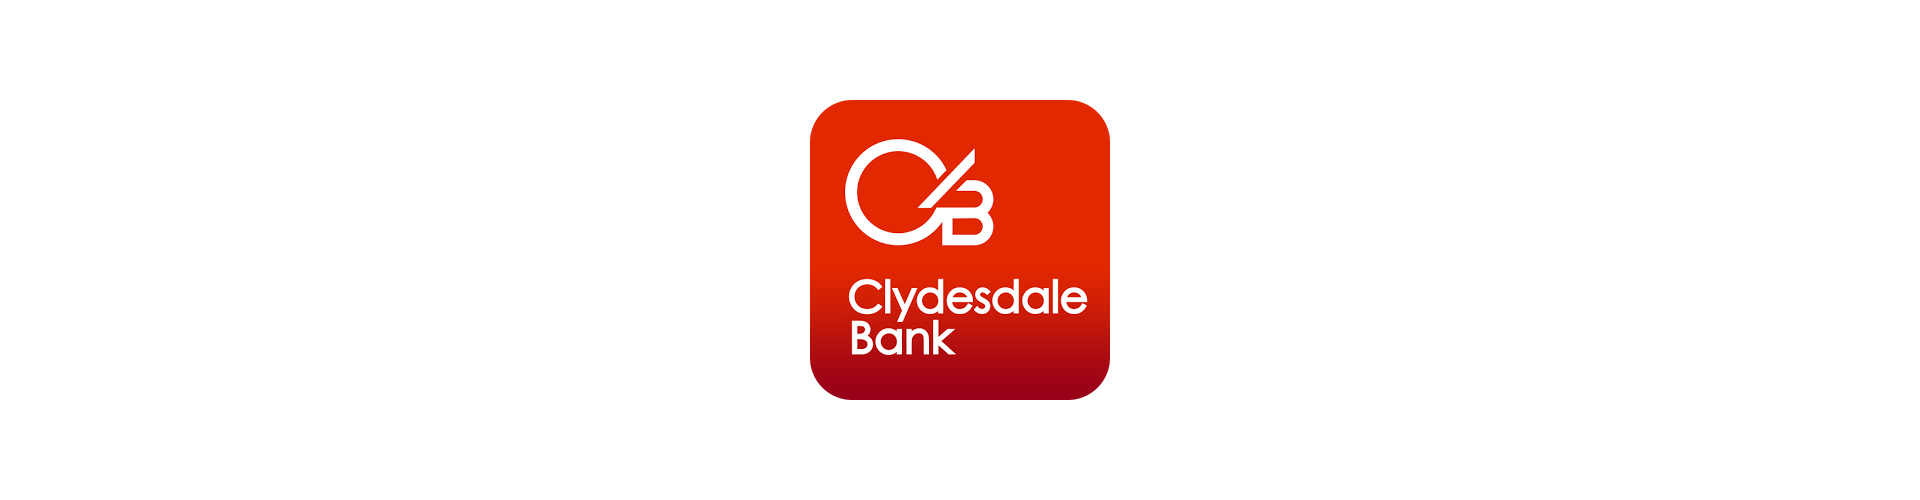 Hood Group primed for growth with Clydesdale Bank refinance